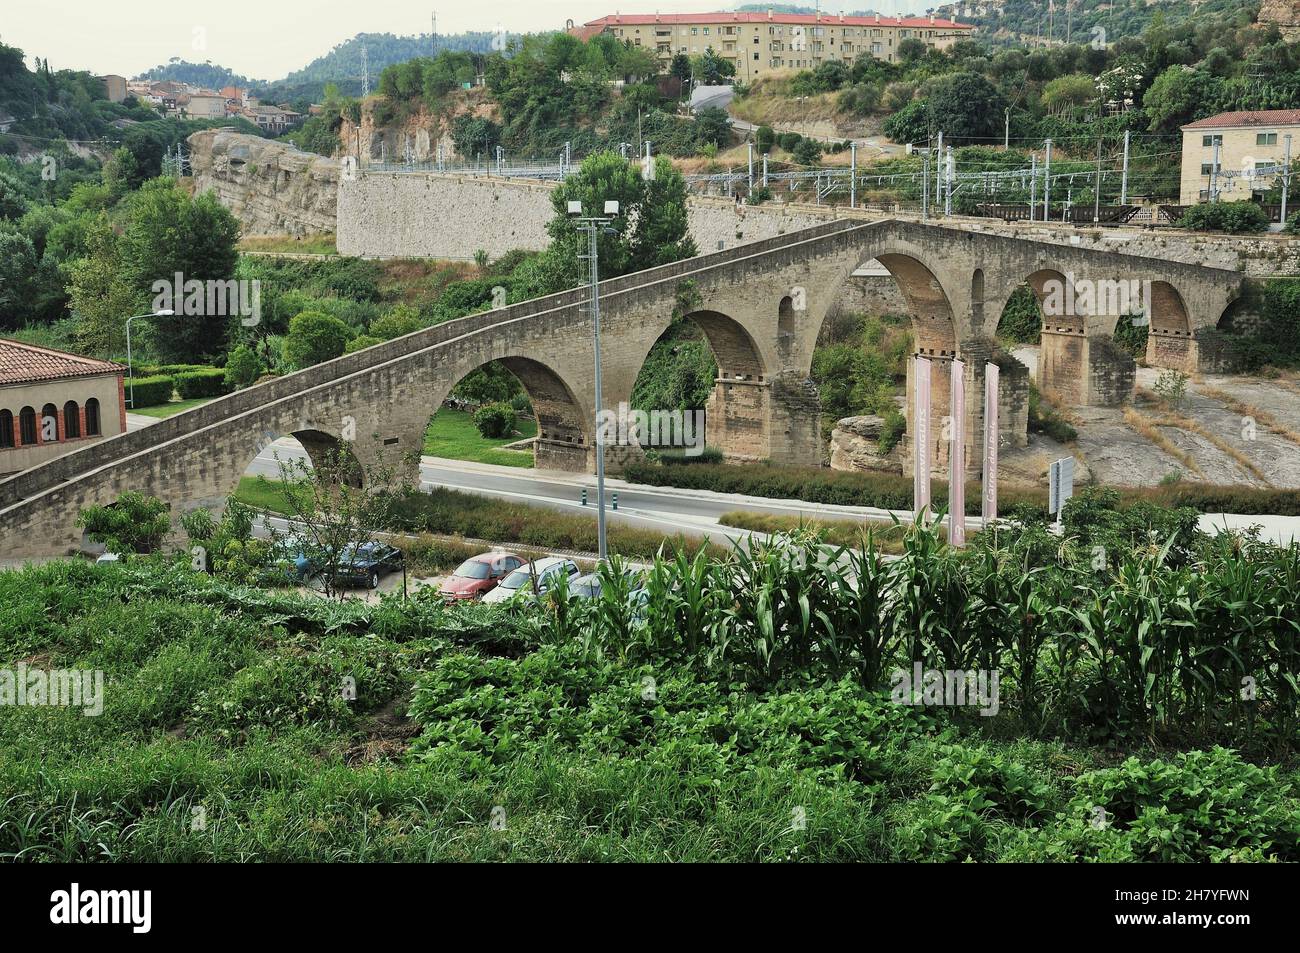 Old bridge of Manresa in the Bages region province of Barcelona, Catalonia, Spain Stock Photo